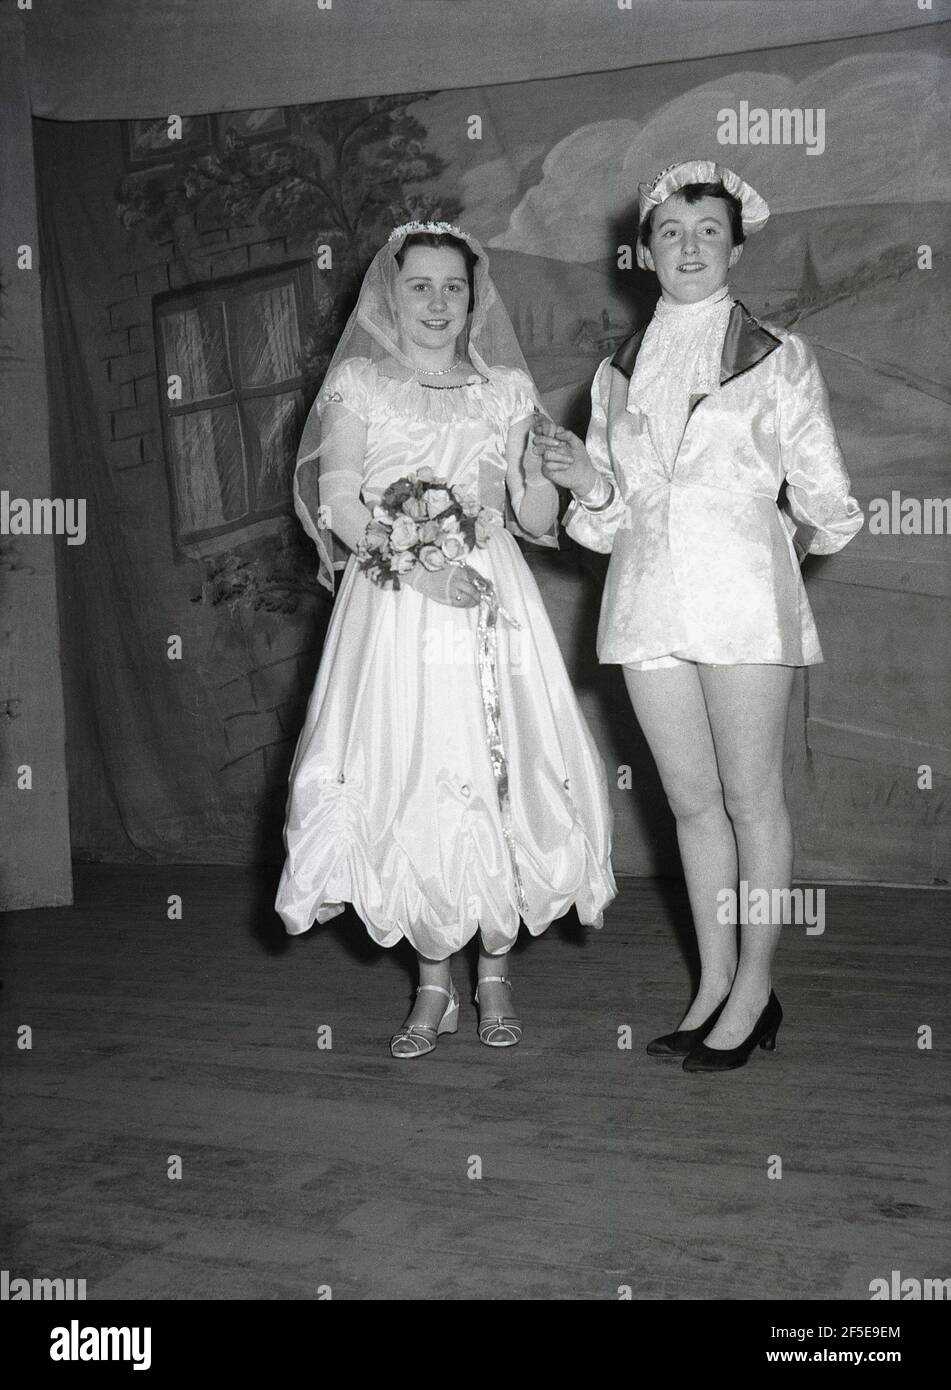 1956, historical, standing on a stage, two young ladies in the costumes of their characters from the play, Jack & the Beanstalk, England, UK. An ancient folk story, it was first published as an English fairy tale, 'The Story of Jack Spriggins and the Enchanted Bean' in 1734 and then in 1807 in 'The History of Jack and the Bean-Stalk' by Benjamin Tabert. Fairy tales are ancient folklore, featuriing mythical creatures; elves, fairies, talking animals, witches and giants in magical stories that are far-fetched and not true and indeed could not possiblly be true. Stock Photo